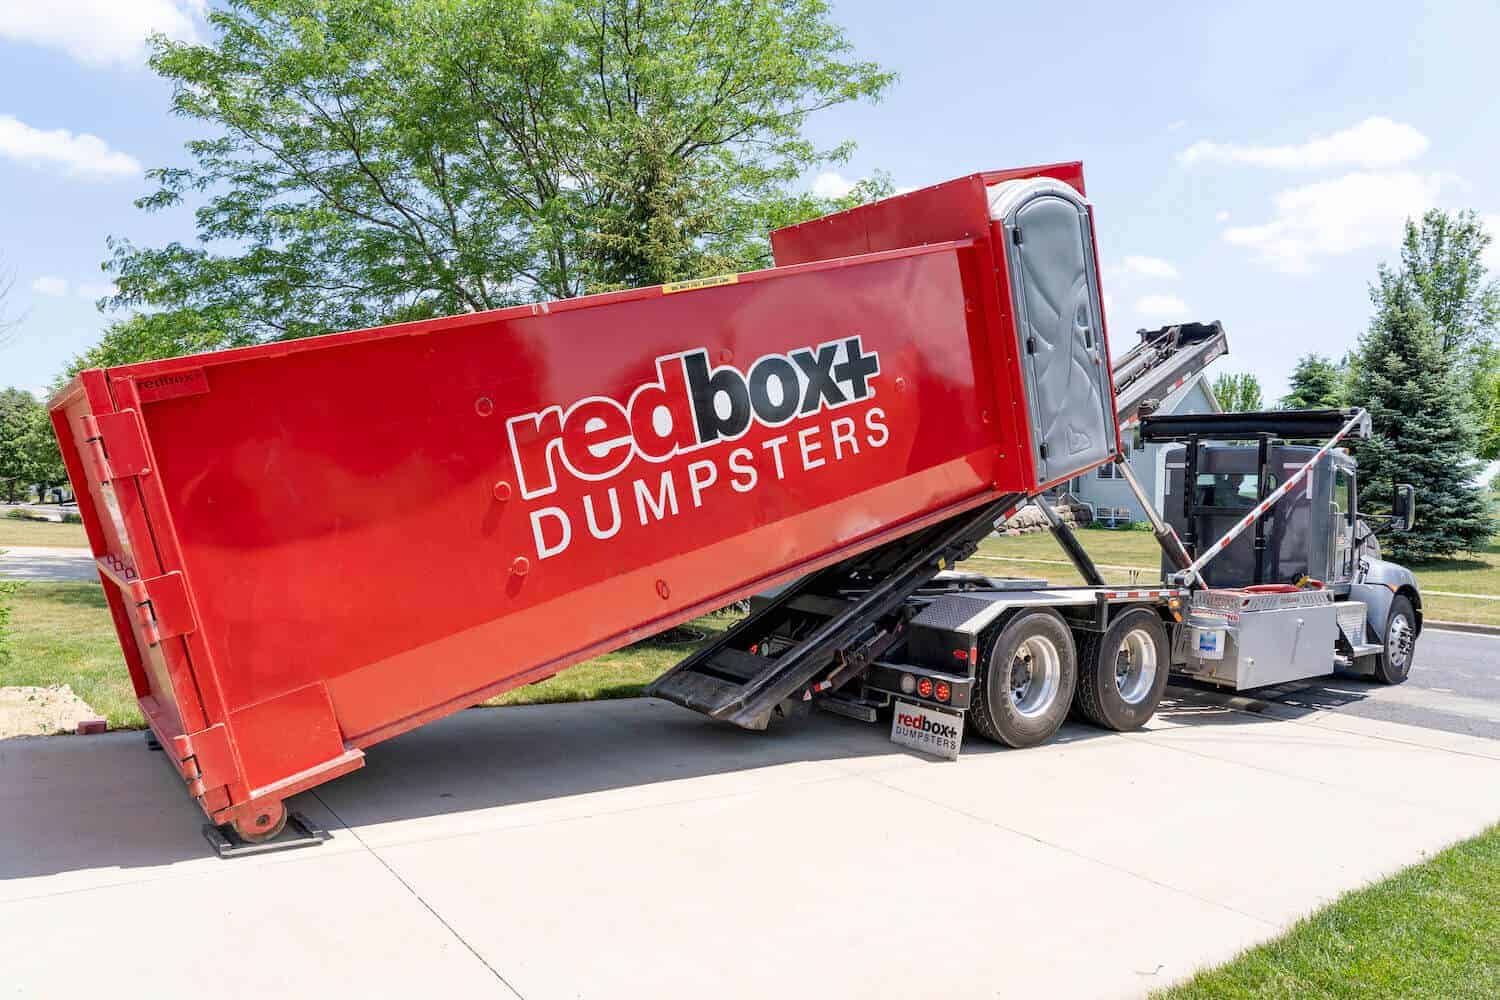 roll off dumpster rental in Chattanooga tn